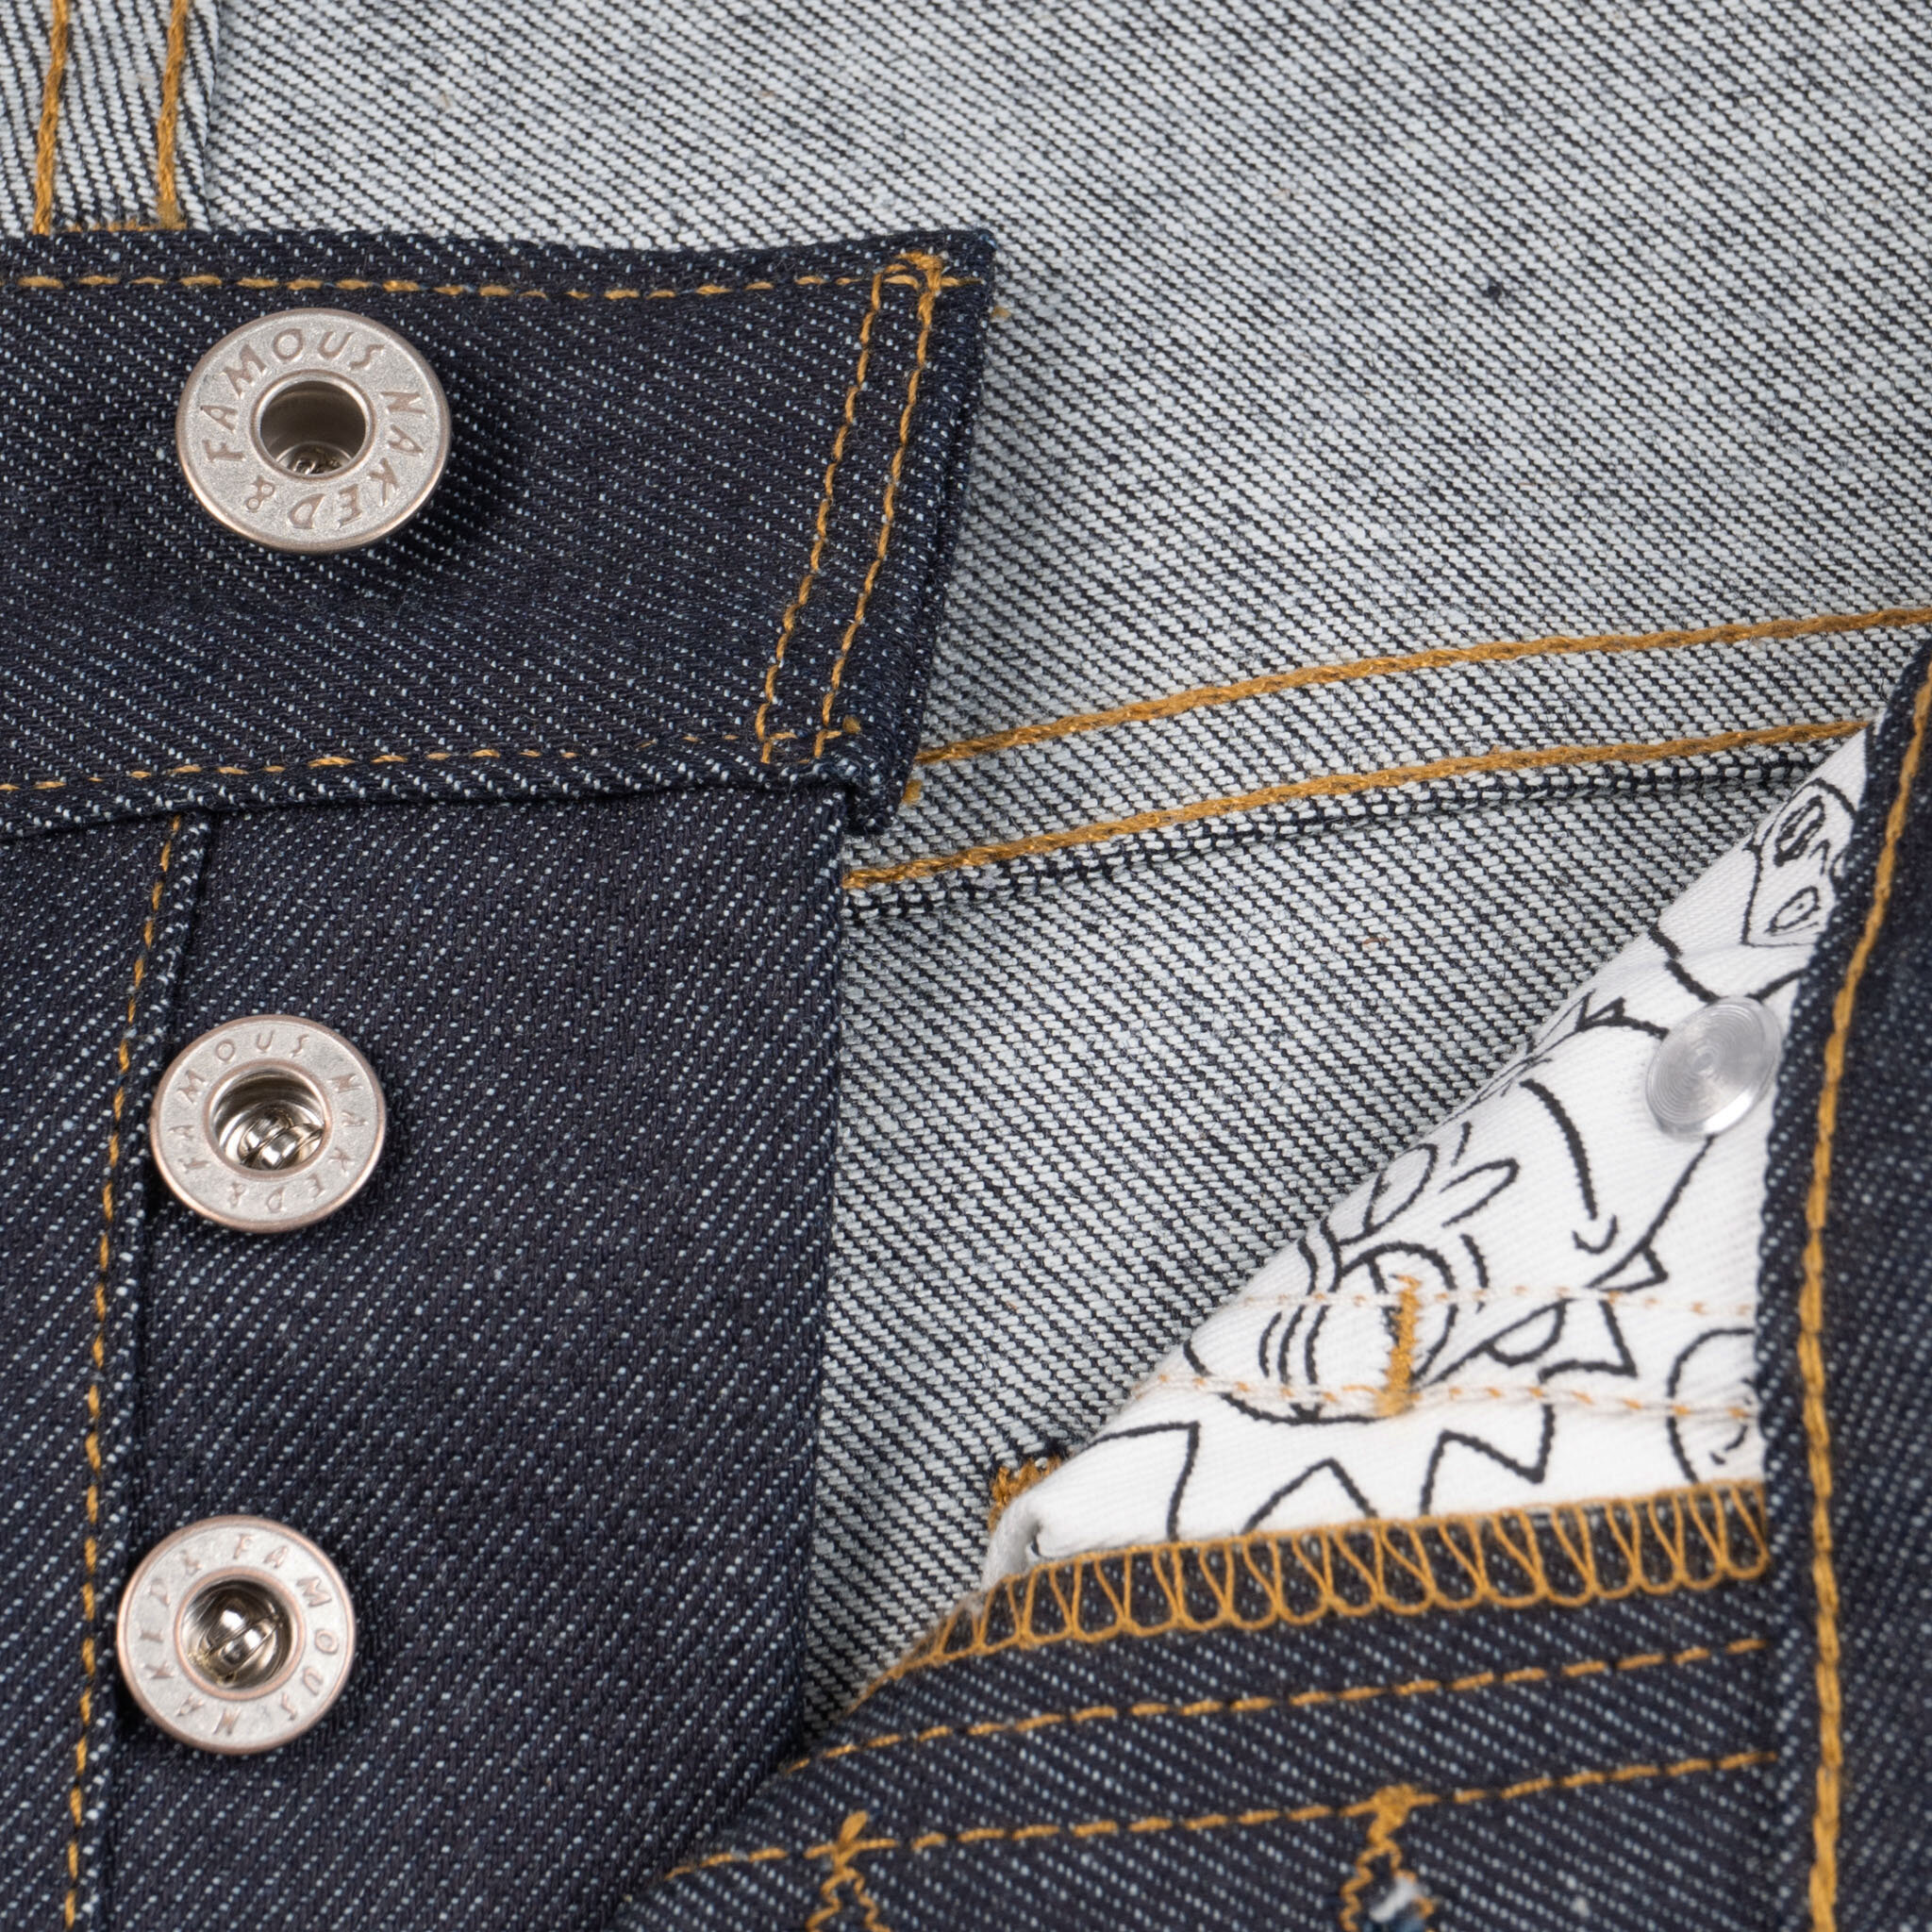  Morty Smith “Aww Geez” Selvedge jeans - button fly 